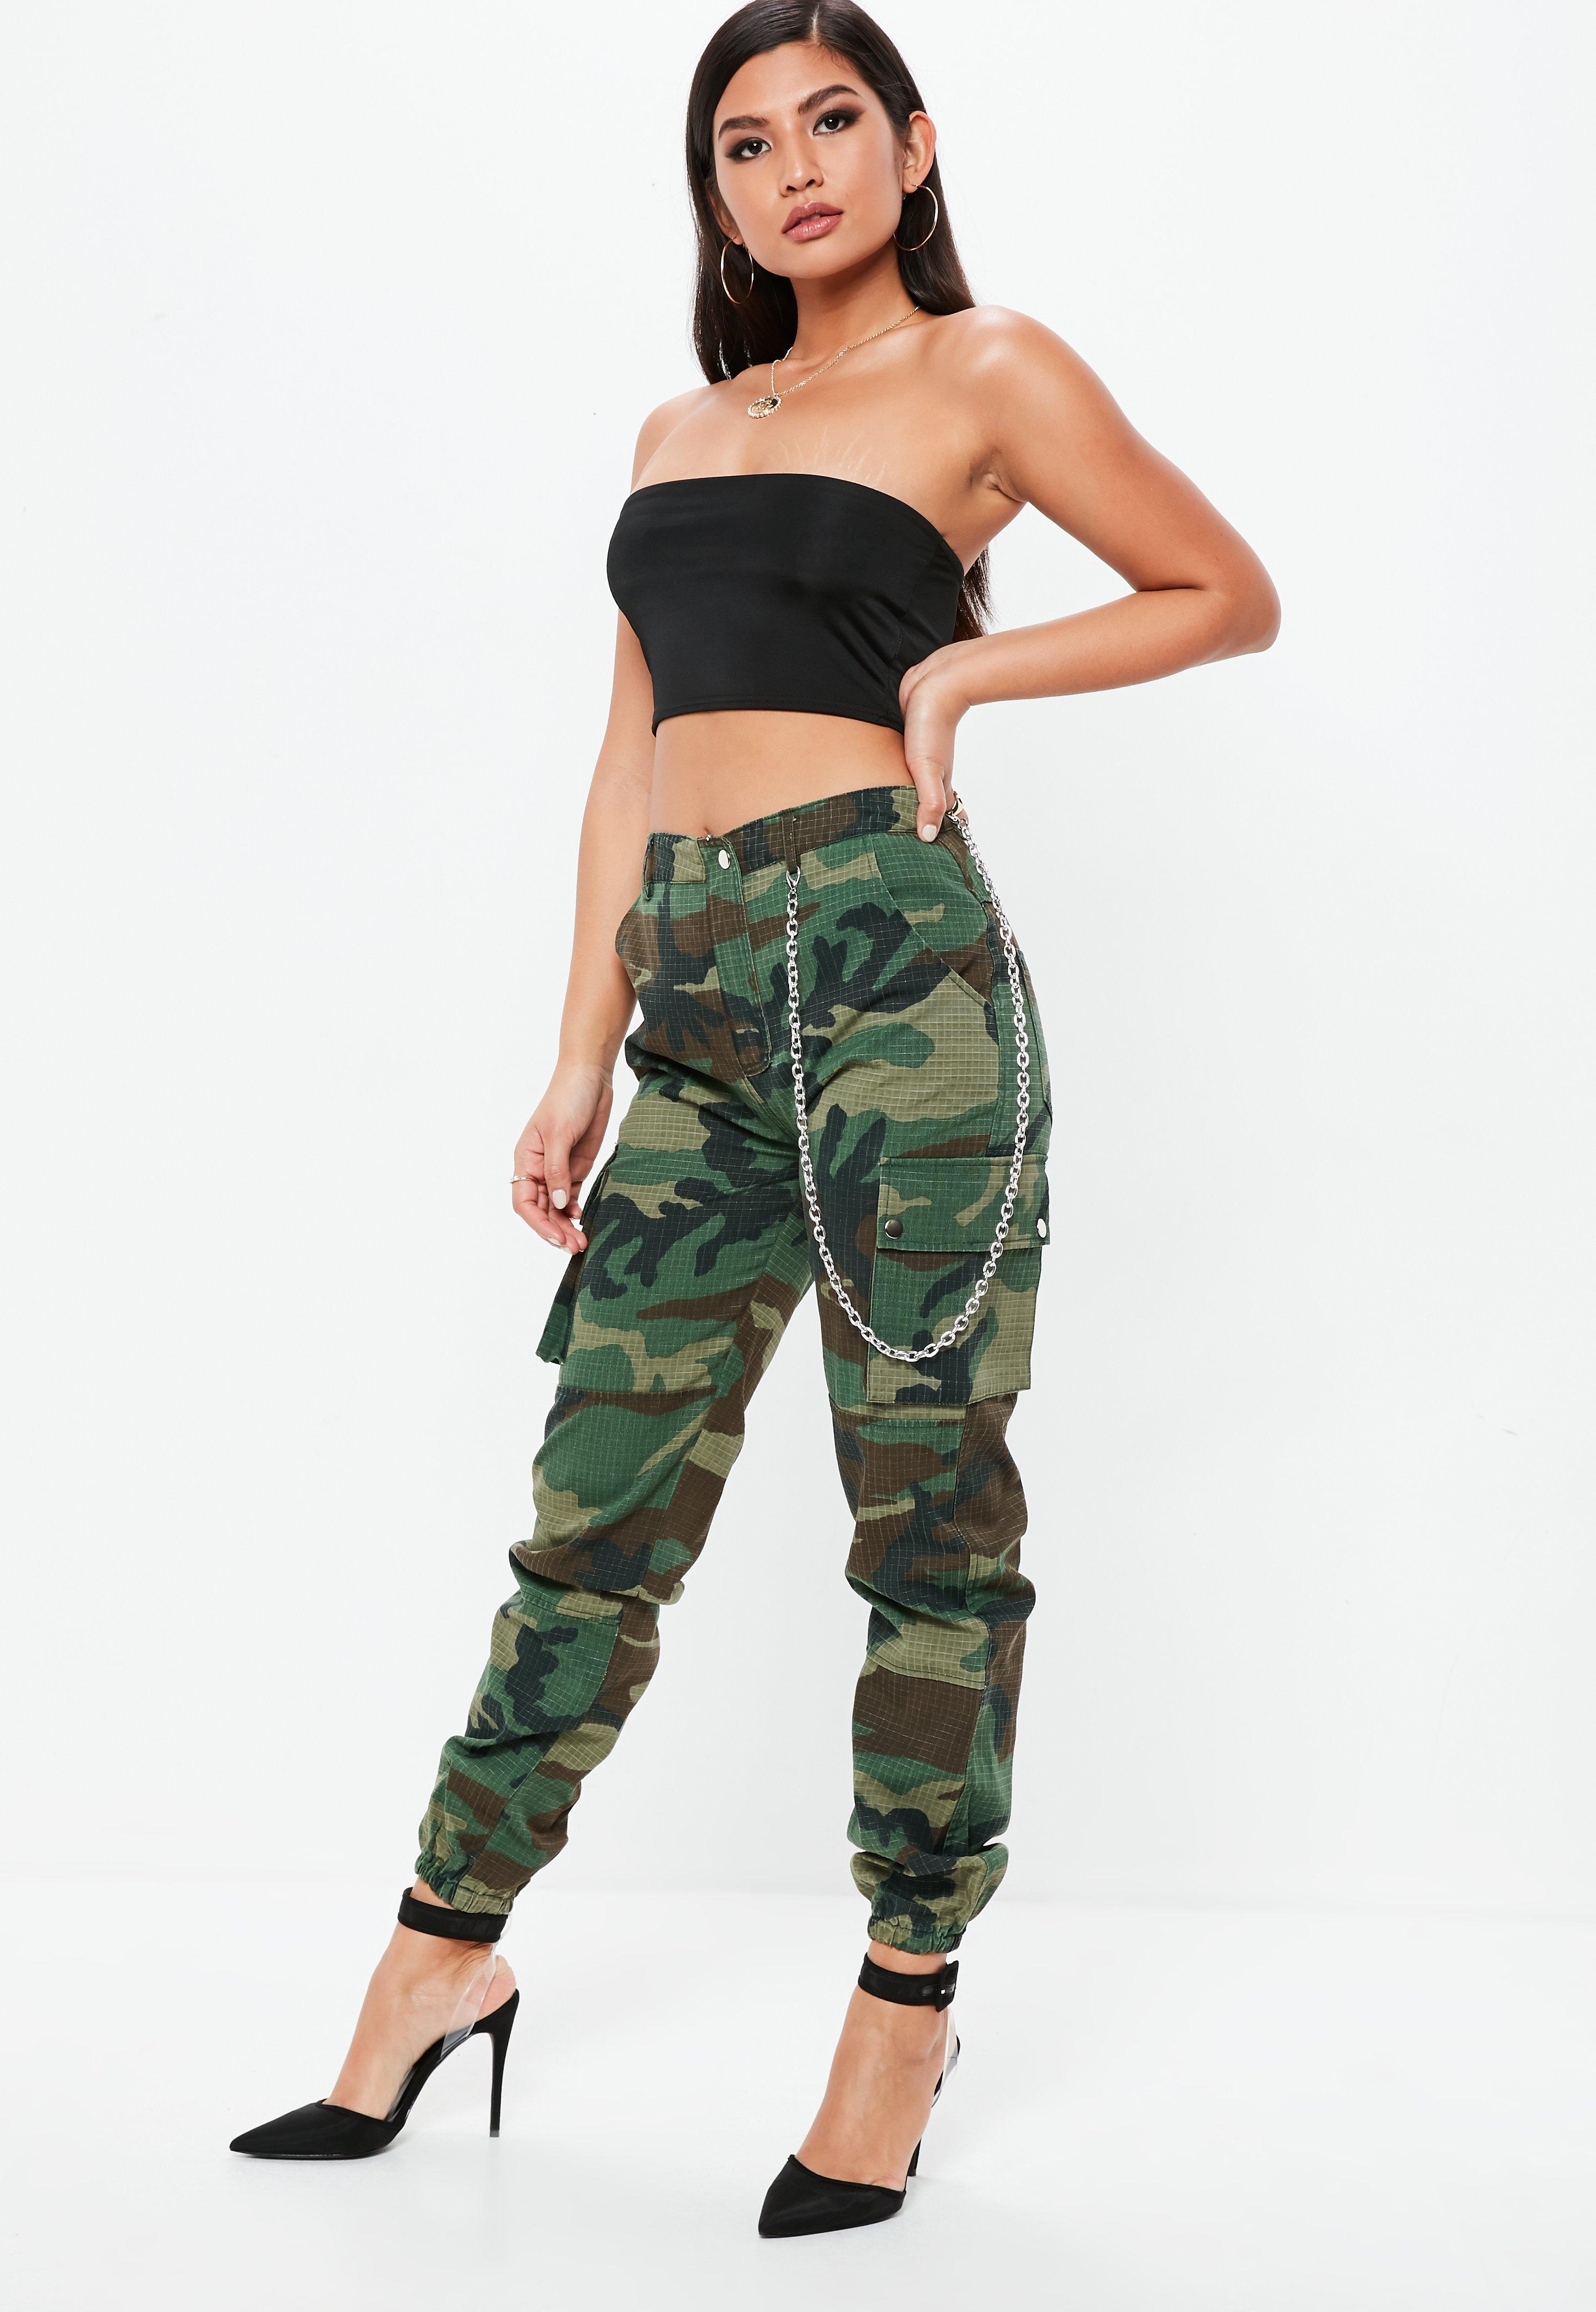 Bulkbuy High Street High Waist Zip Fly Allover Printed Contrast Patch  Pockets Cargo Pants Women Full Camouflage Trousers price comparison